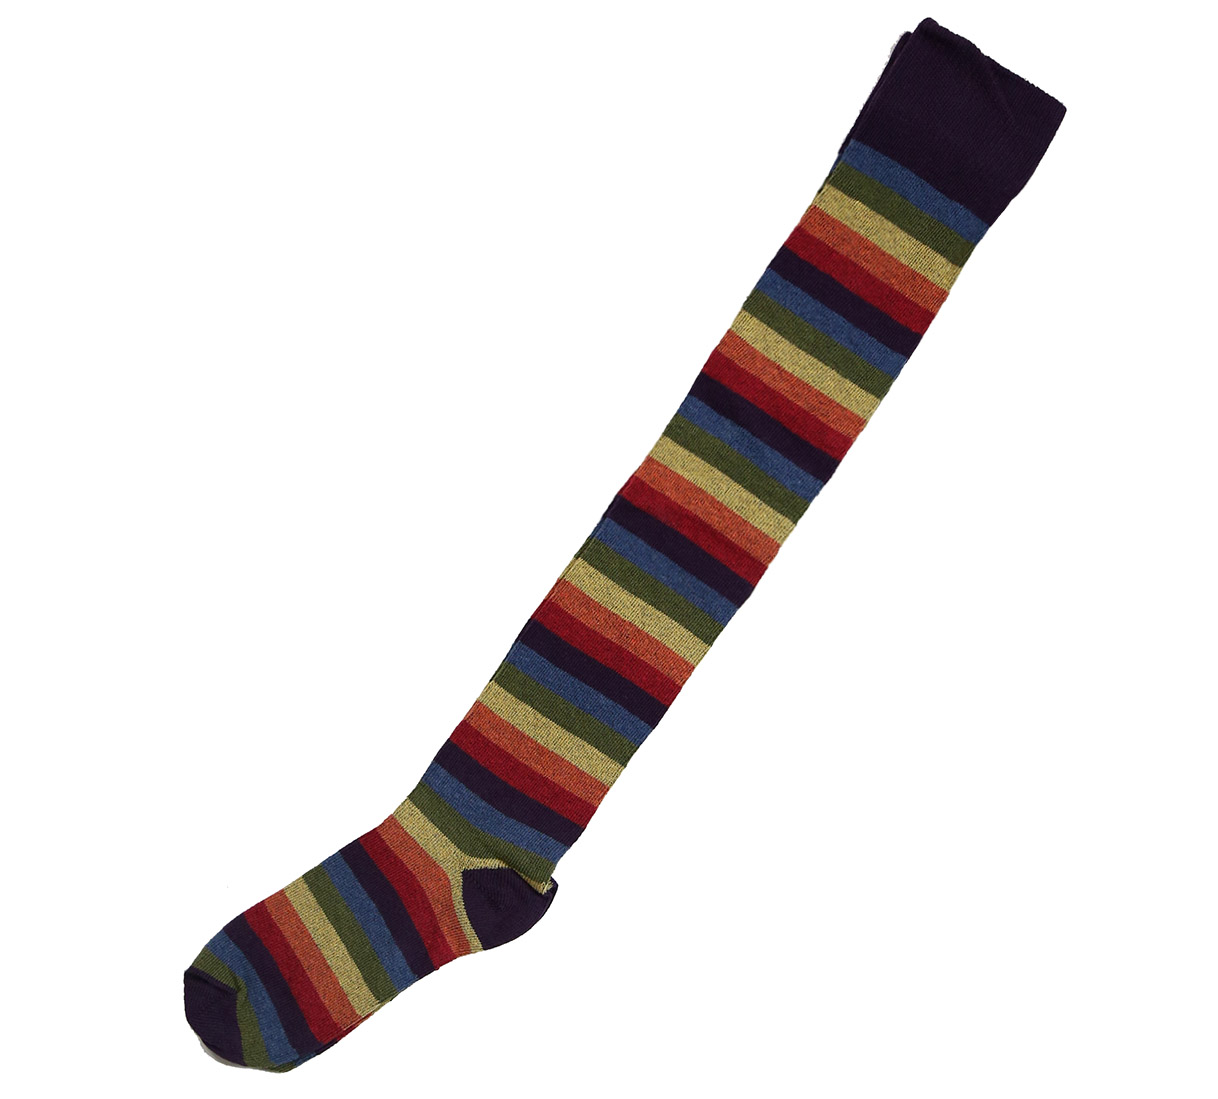 Rainbow Striped Over the Knee socks | Striped Thigh high Socks | Made in USA Socks at Between the Sheets